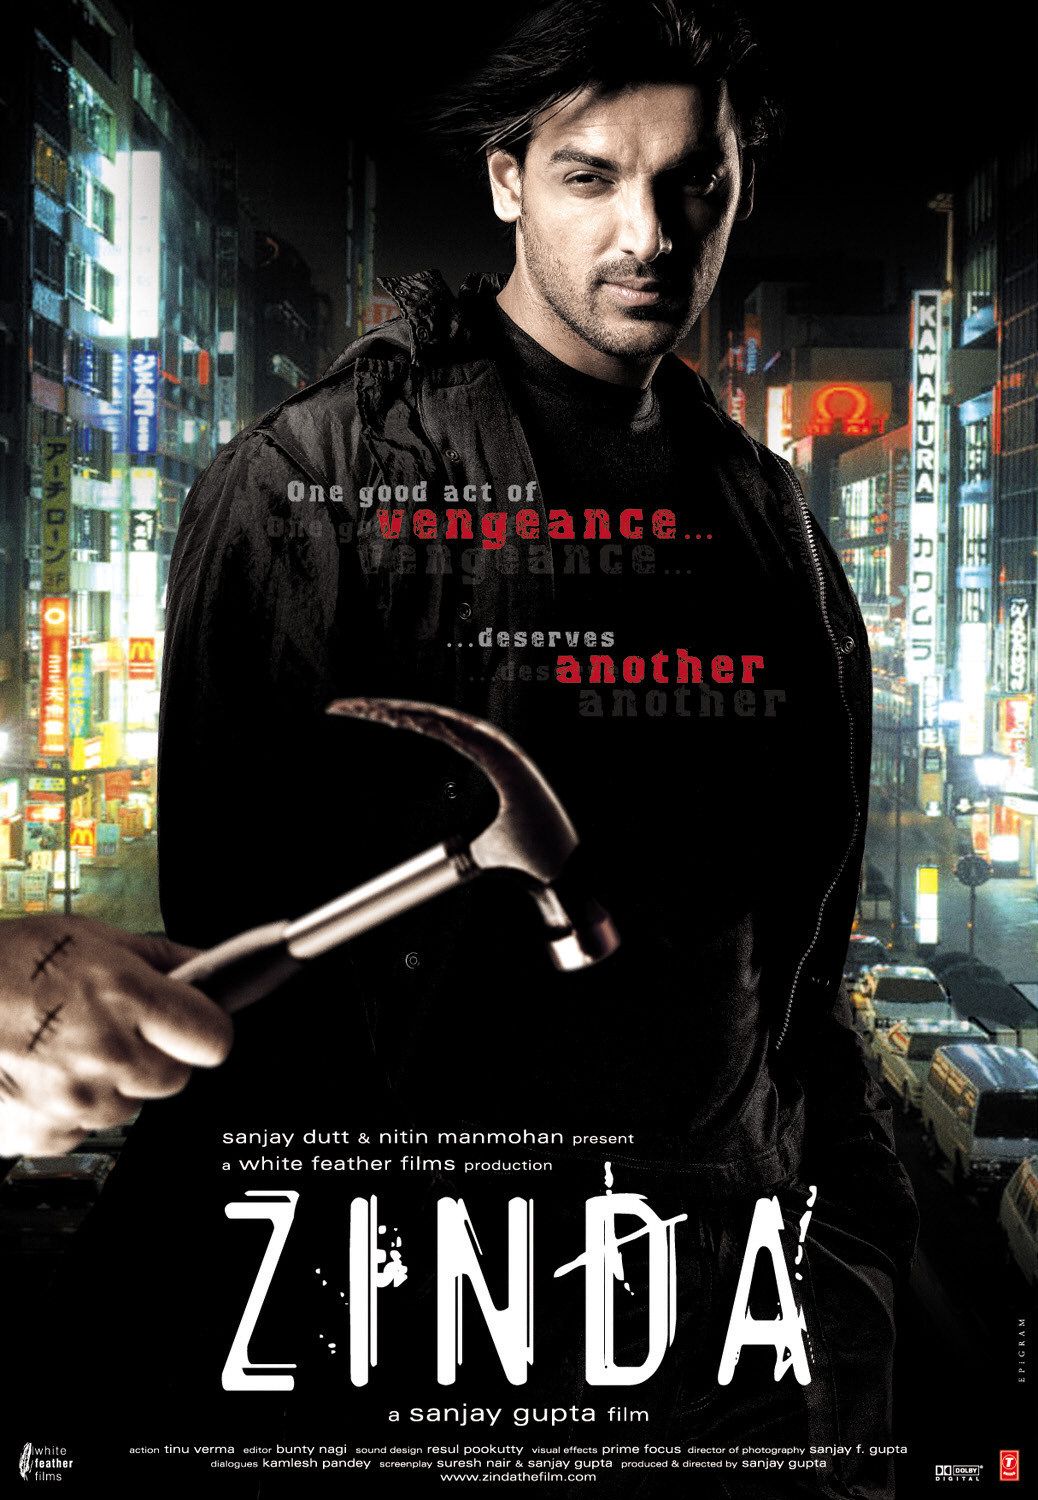 Extra Large Movie Poster Image for Zinda (#2 of 8)